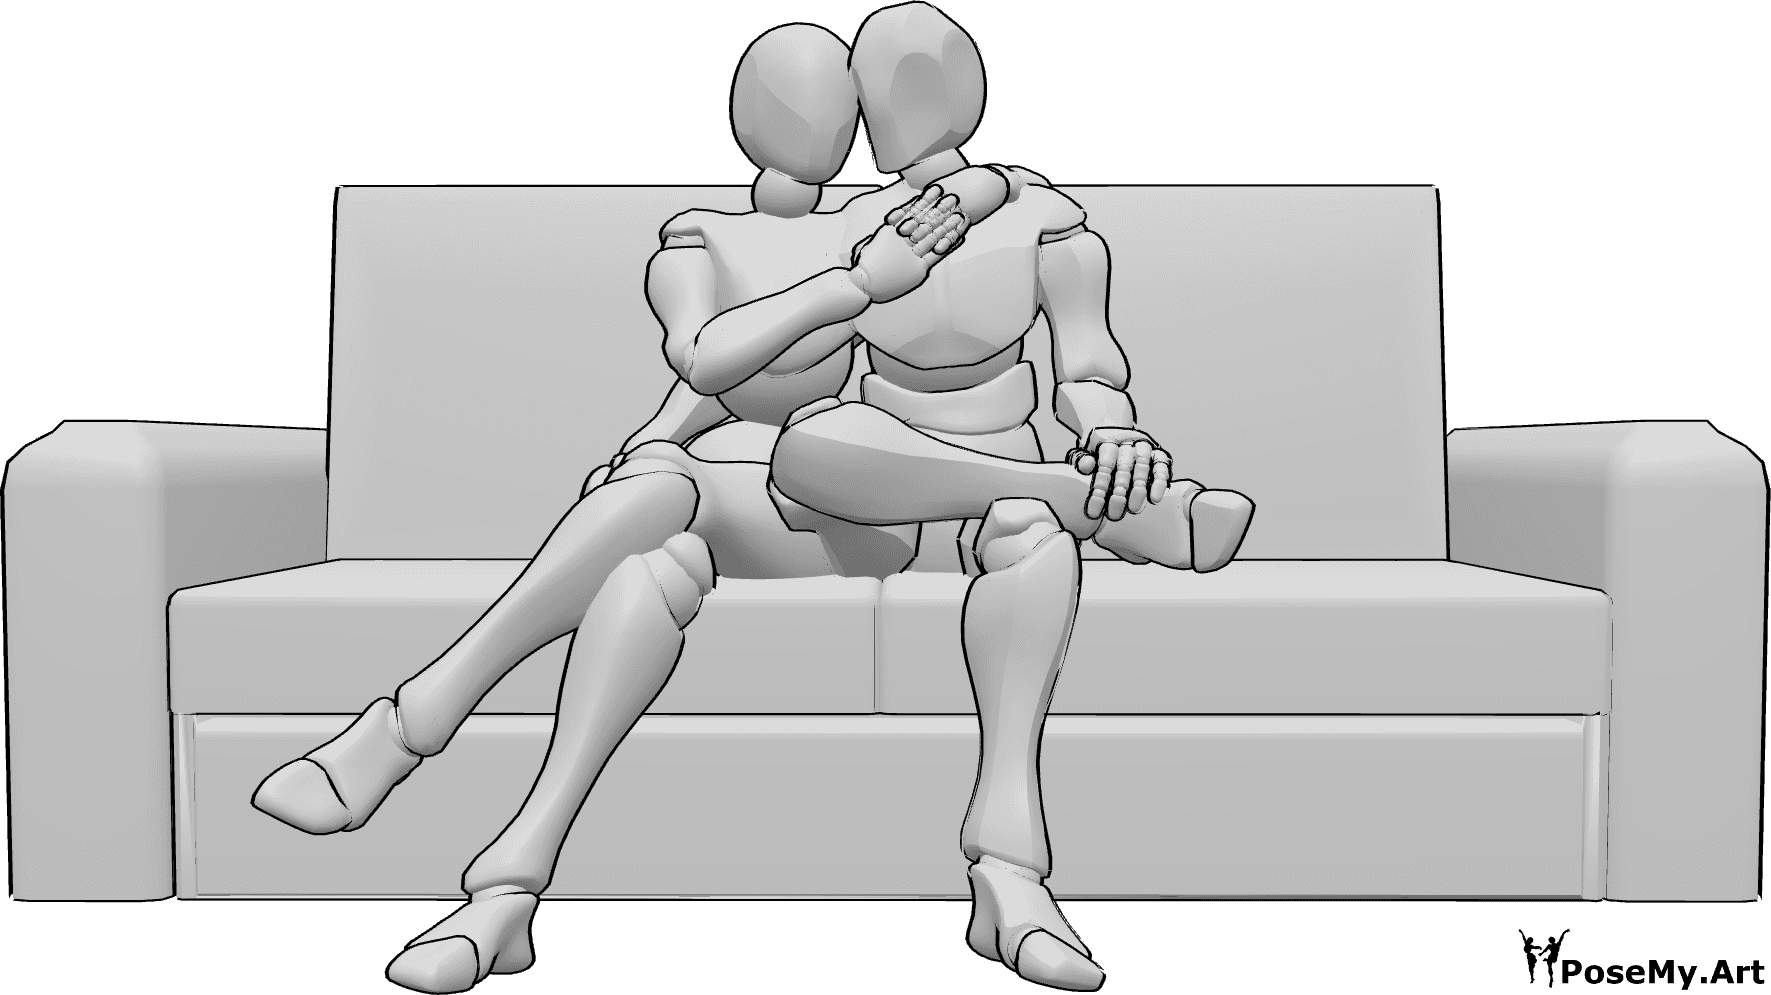 Pose Reference- Cuddling sitting couch pose - Female and male are sitting on the couch and cuddling, hugging each other